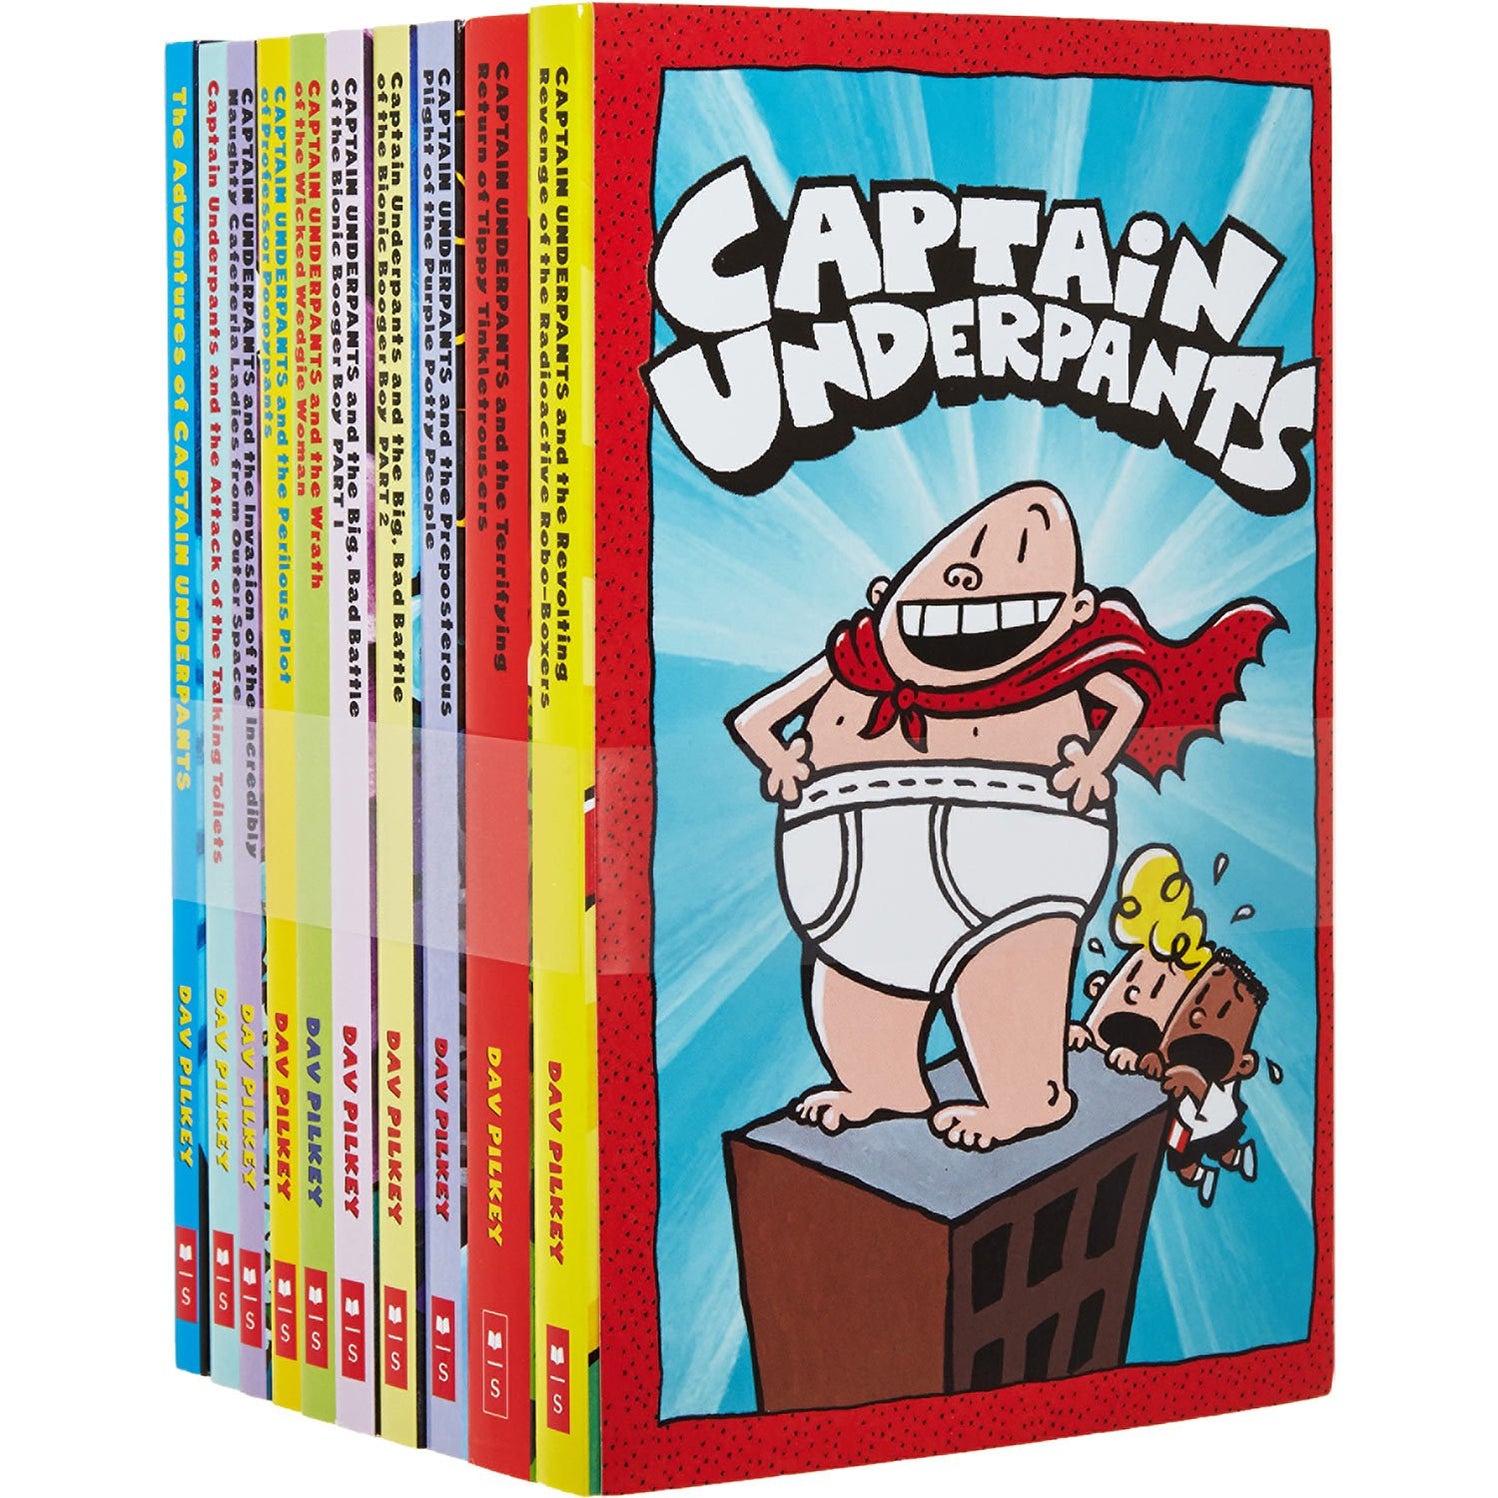 Captain Underpants Series 10 Books Collection Set by Dav Pilkey The